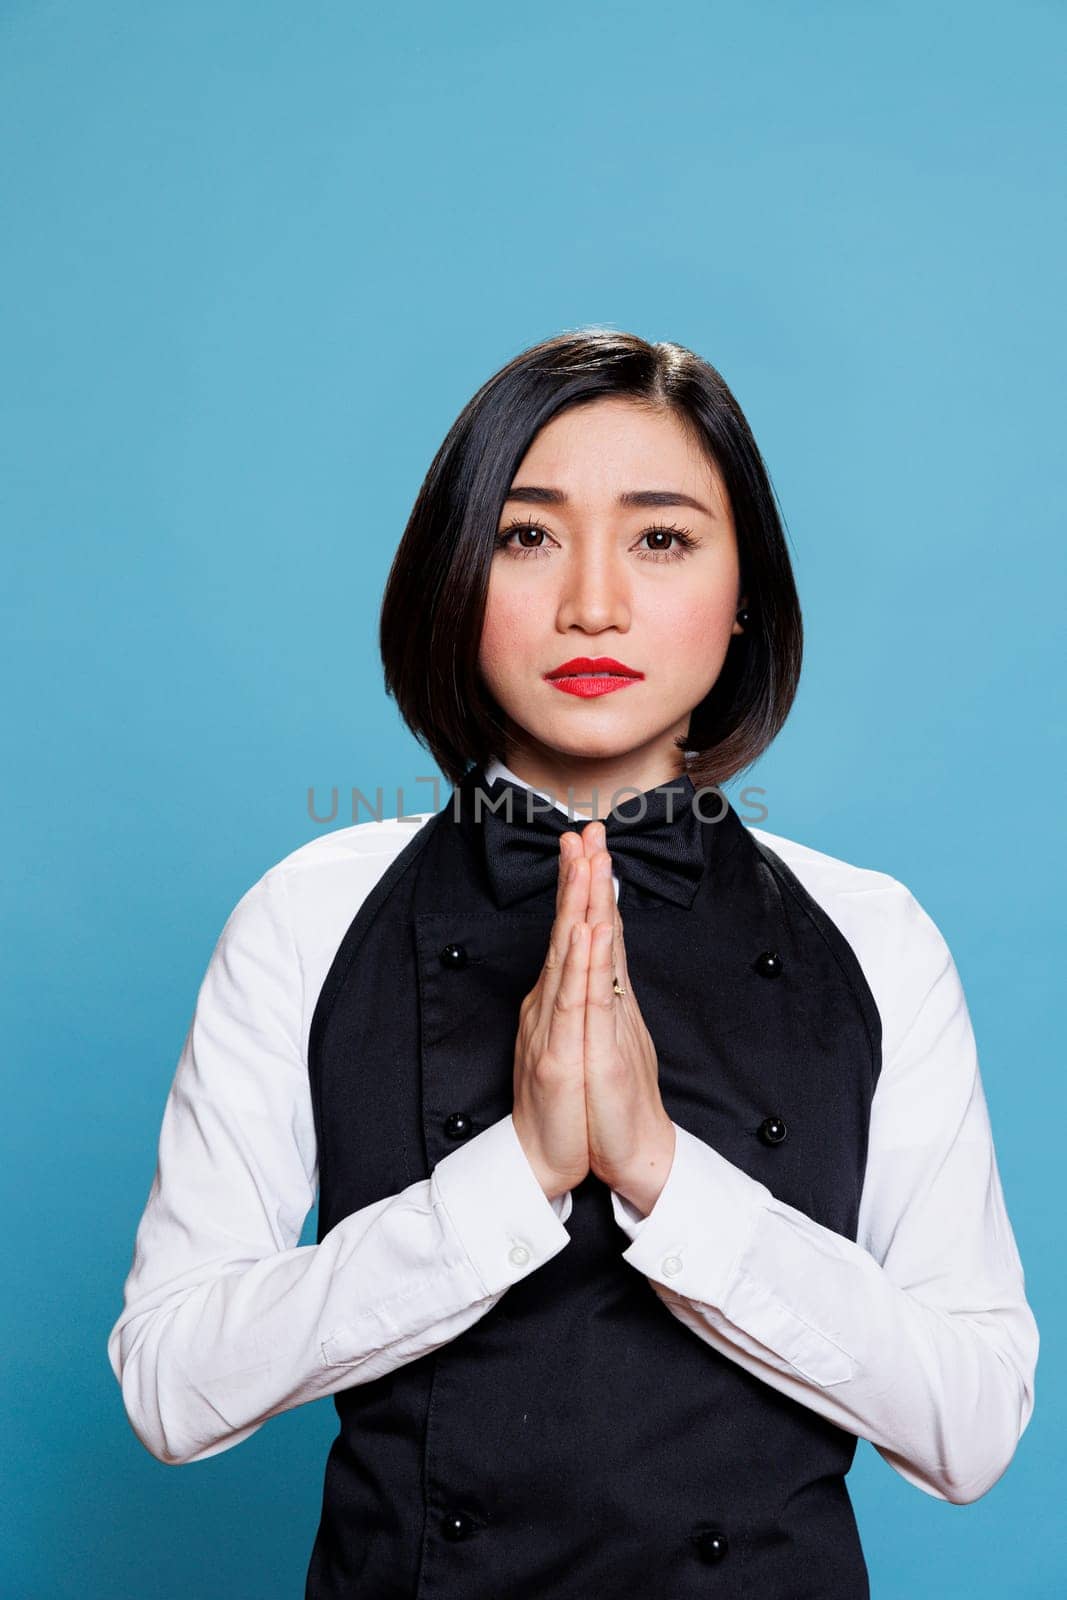 Young asian woman receptionist meditating with folded palms, relaxing and looking at camera. Attractive cafe waitress wearing uniform standing in zen pose portrait on blue background